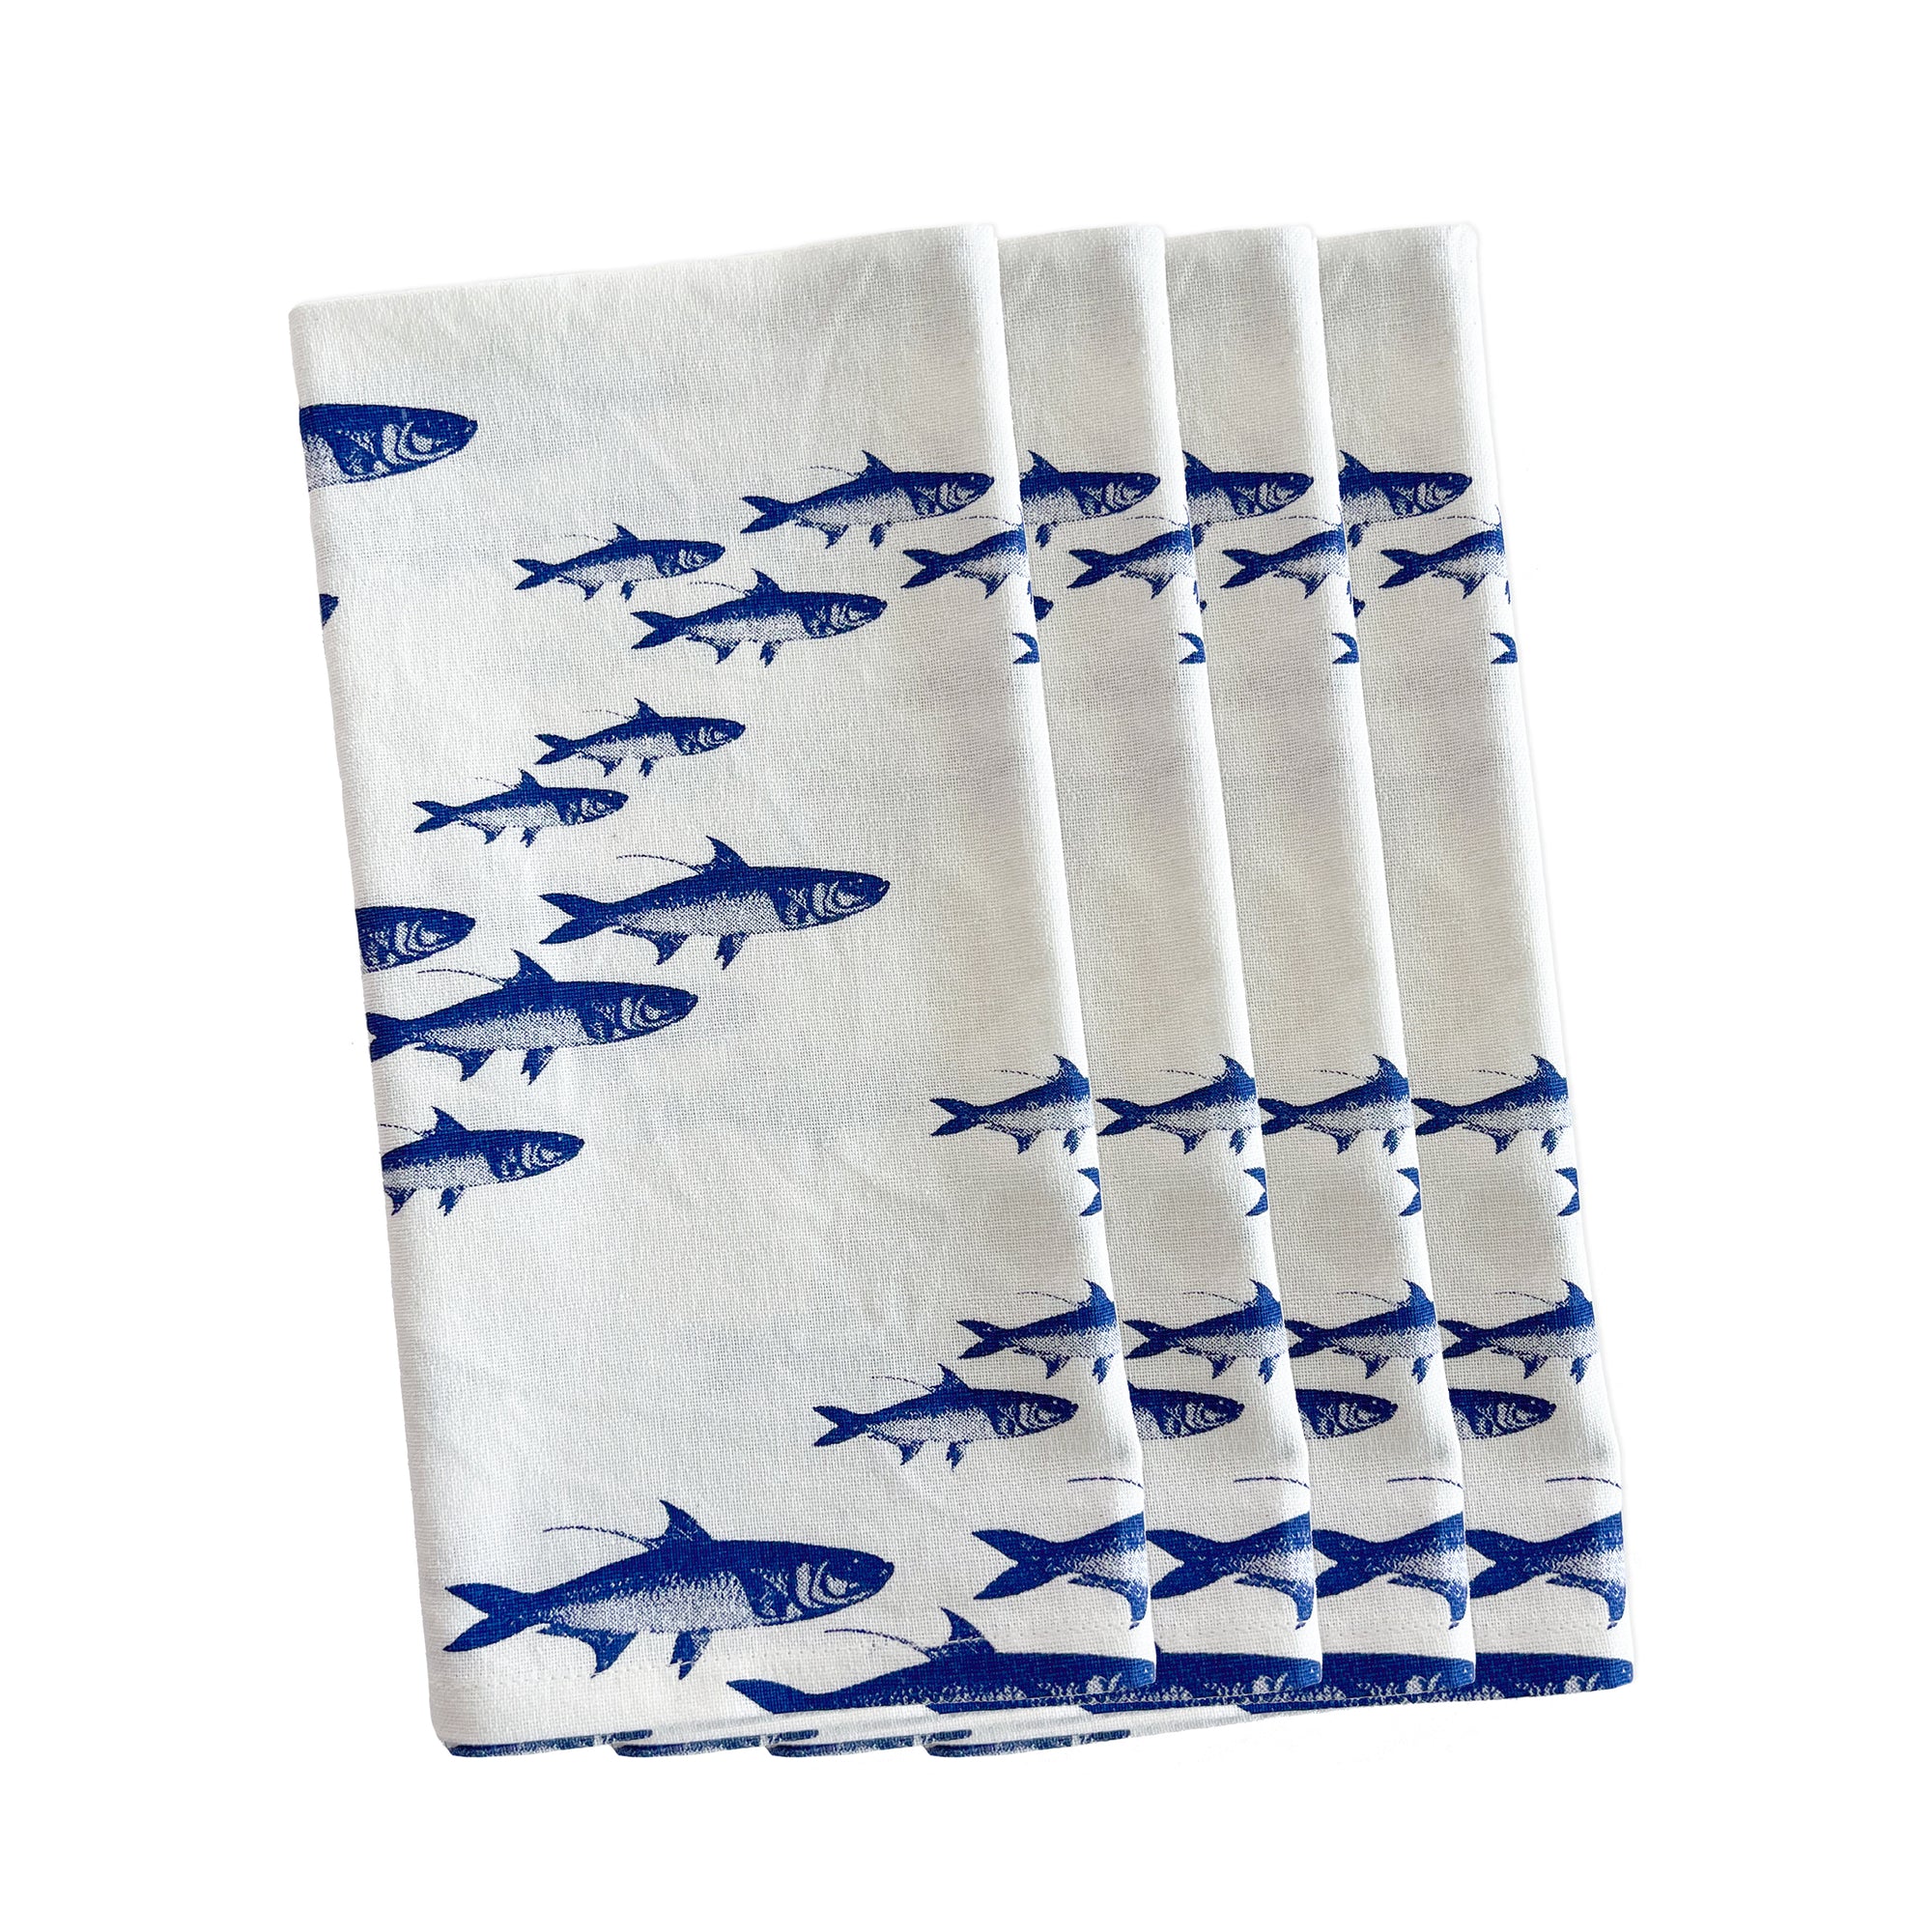 A white 100% cotton kitchen towel with a School of Fish Dinner Napkins, Set of 4 design, neatly folded on a plain background by Caskata.